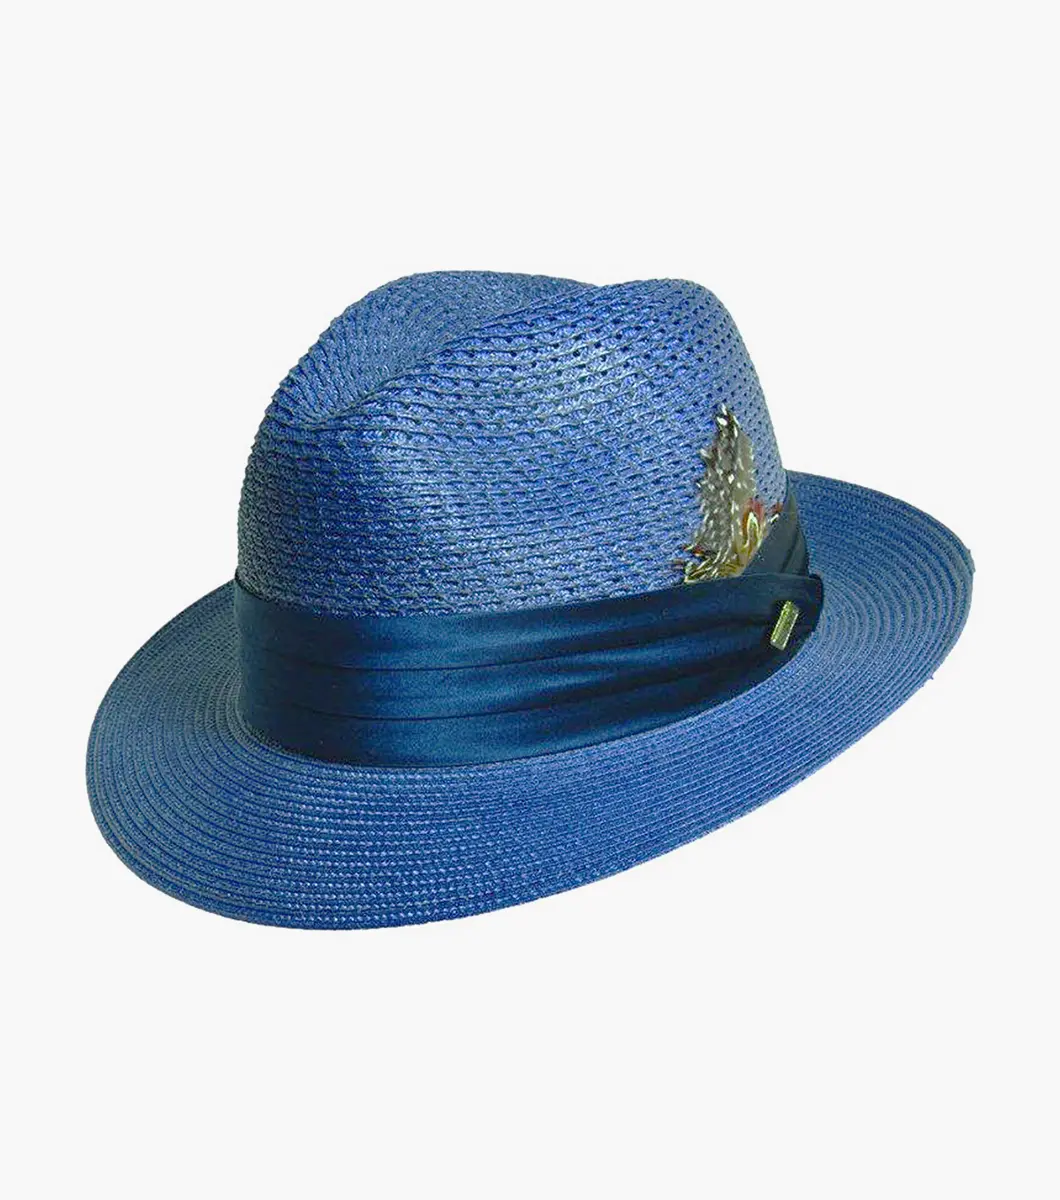 Blue DUBLIN FEDORA (STACY ADAMS) Poly Braided Pinch Front Hat Sizes L-XL